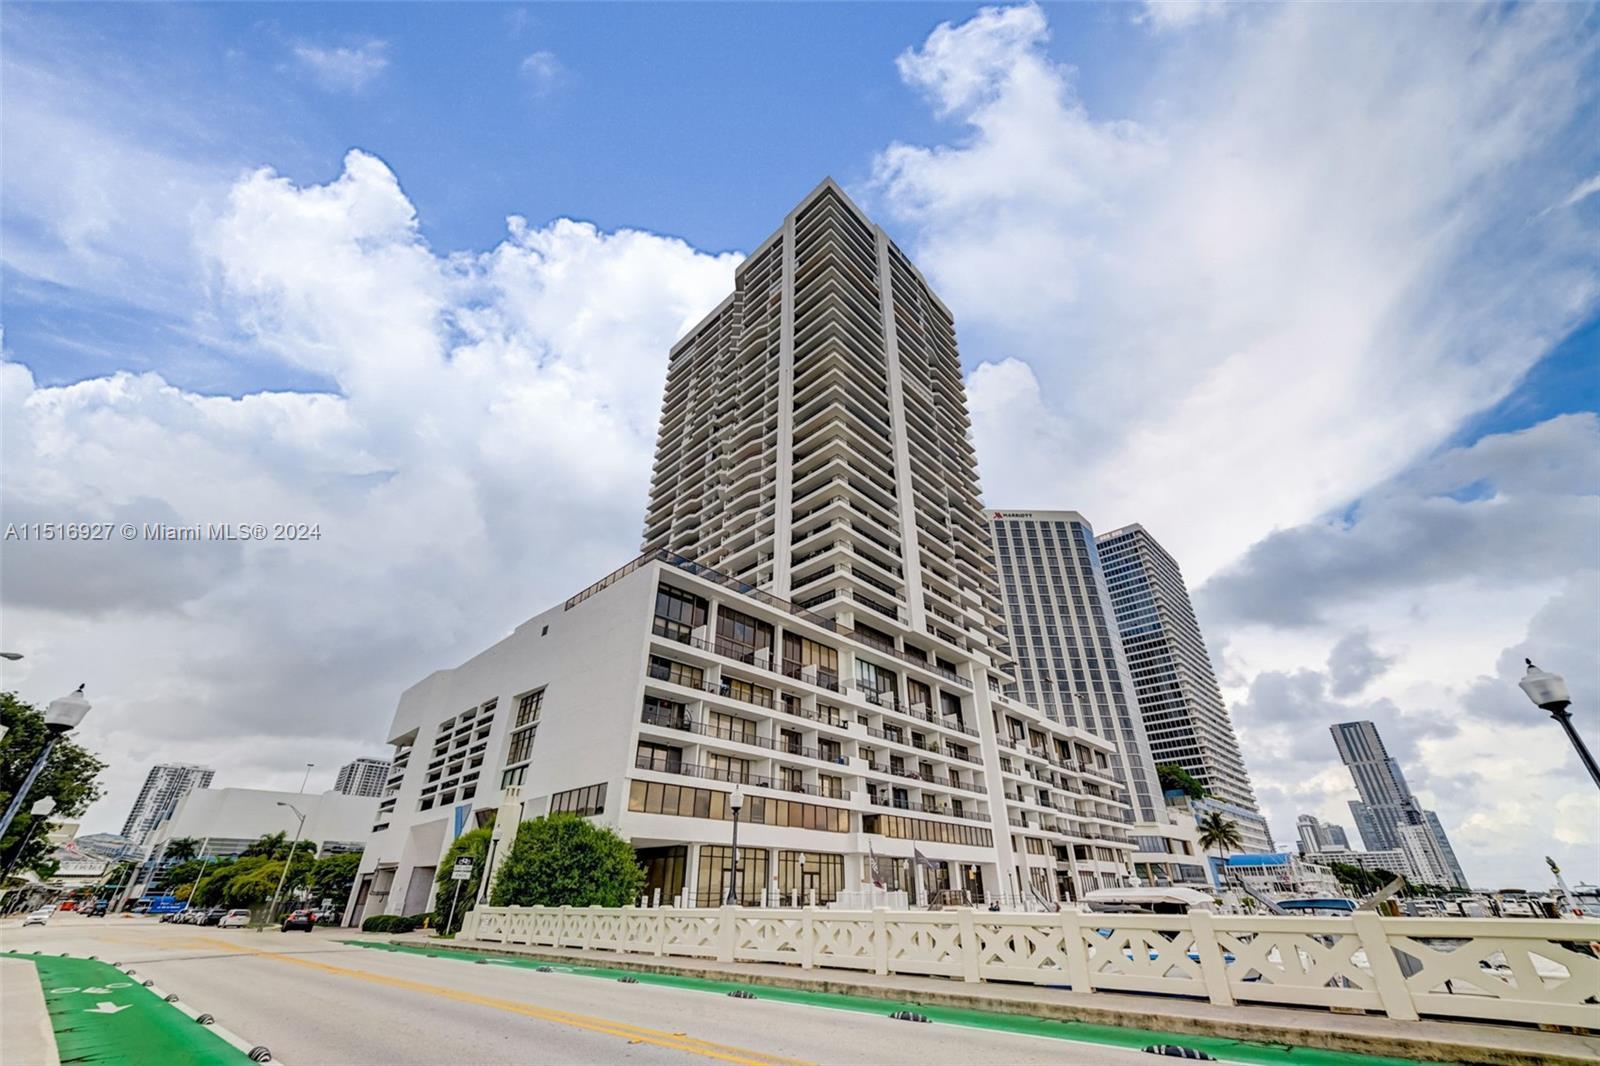 The best of both worlds! Easy access to the Beach and proximity to the hustle and bustle of Brickell